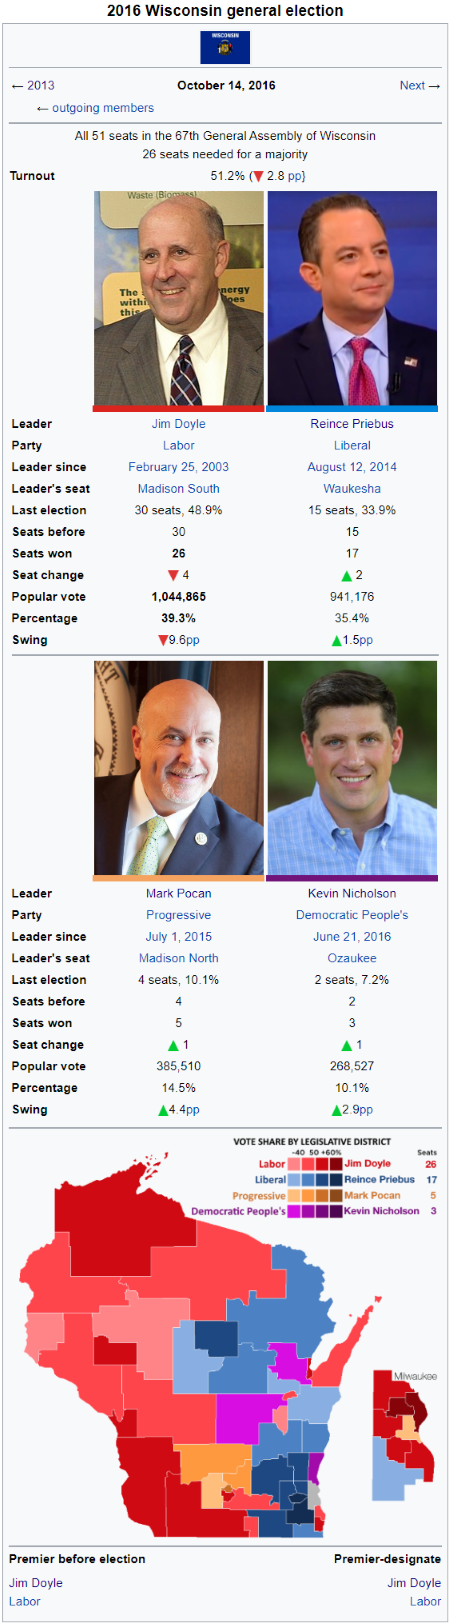 2016-wisconsin-provincial-election-wiki-2-png.493748